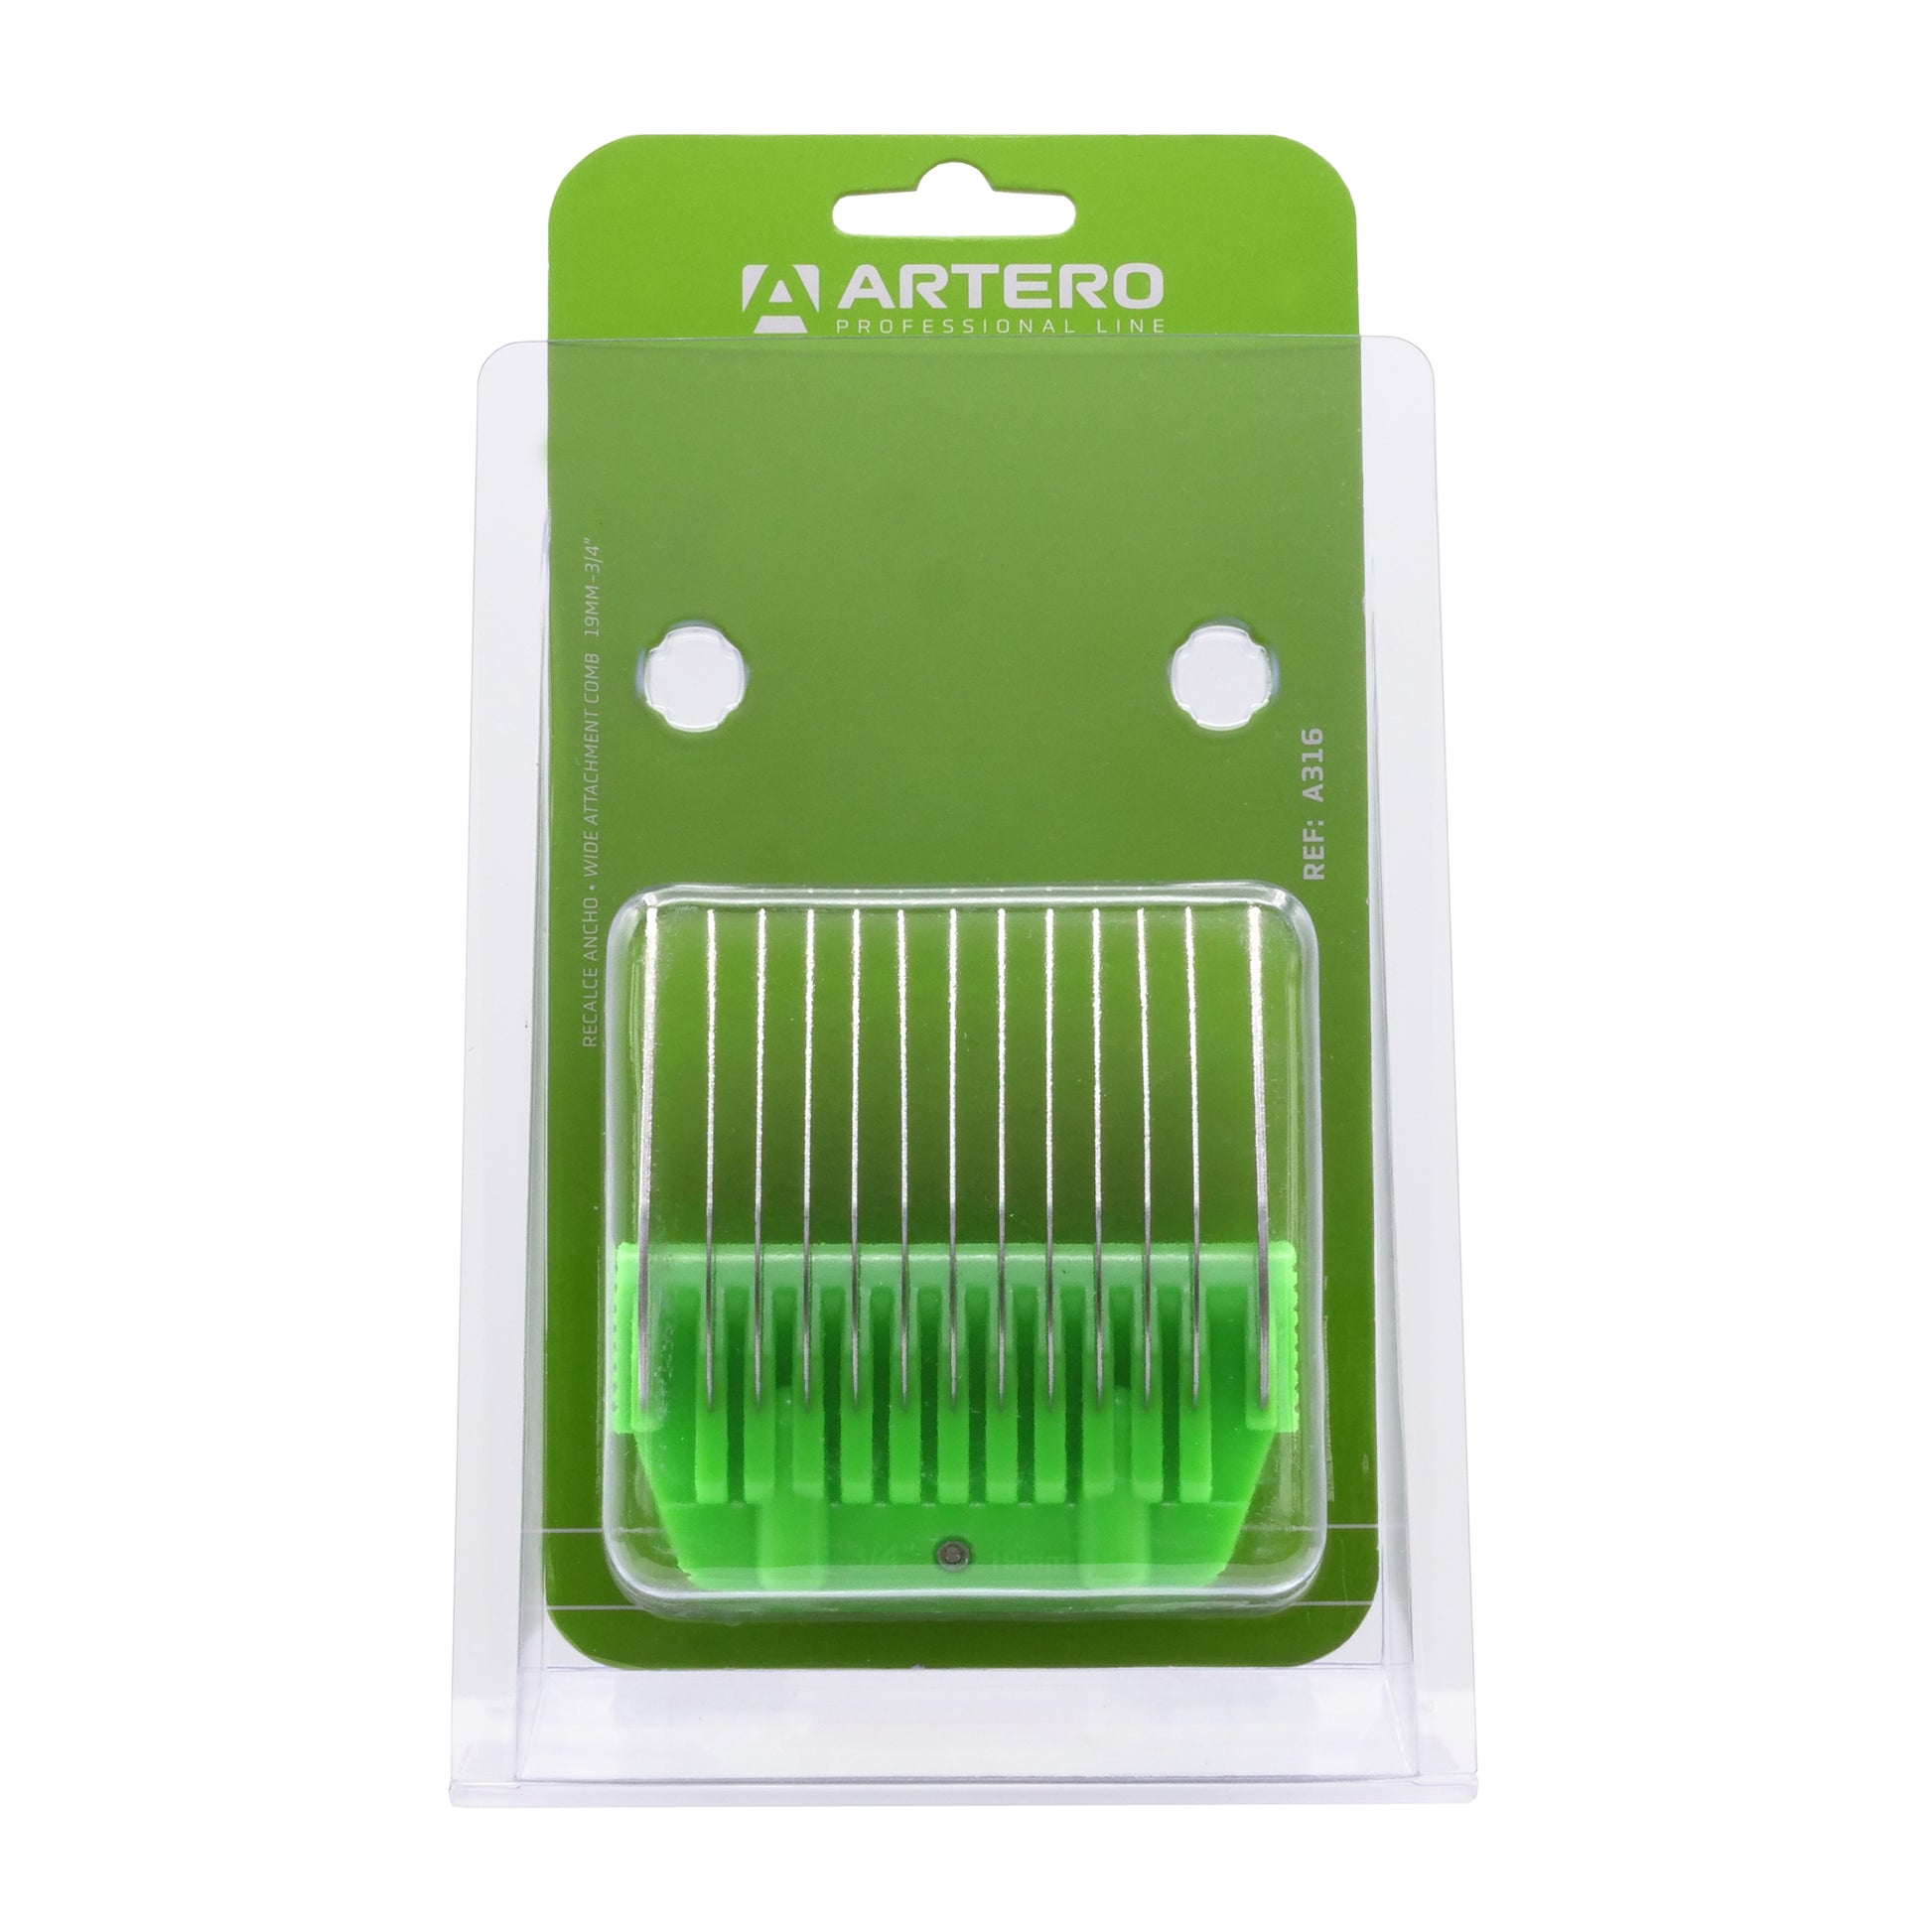 The Artero Wide Snap-On Metal Comb 19mm - 3/4" is designed for use with the Artero A5 wide clipper blade and offers a smooth, even finish. This comb is also compatible with Andis, Moser, Heiniger, Oster, and Aesculap Fav5 and Fav5 CL blades. Features: Cutting height: 3/4" Metal Construction Fits A5 Clippers.